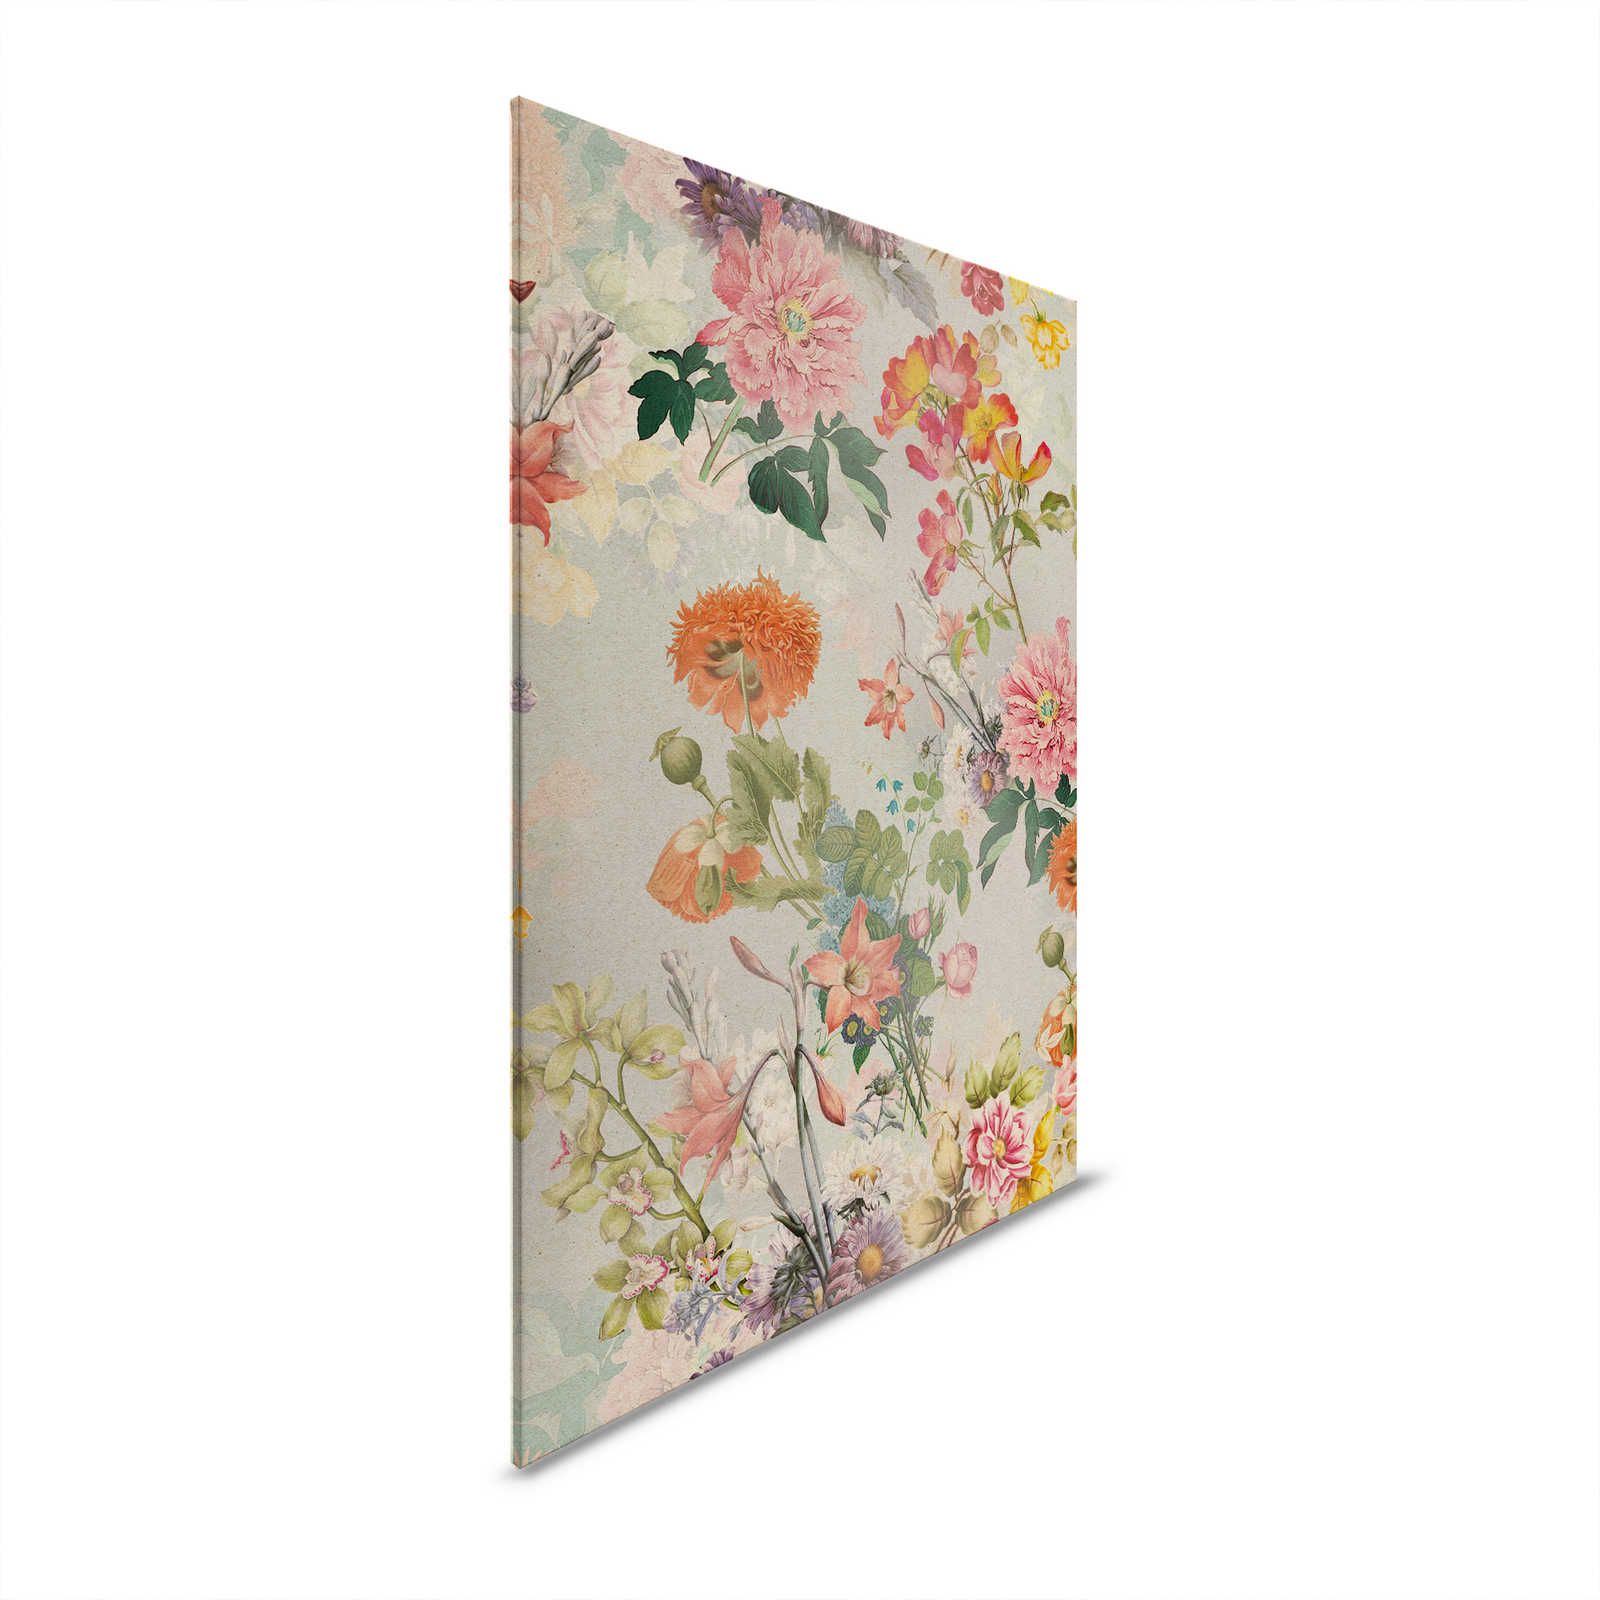 Amelies Home 1 - Vintage Flowers Romantic Country Style Canvas Painting - 1.20 m x 0.80 m
